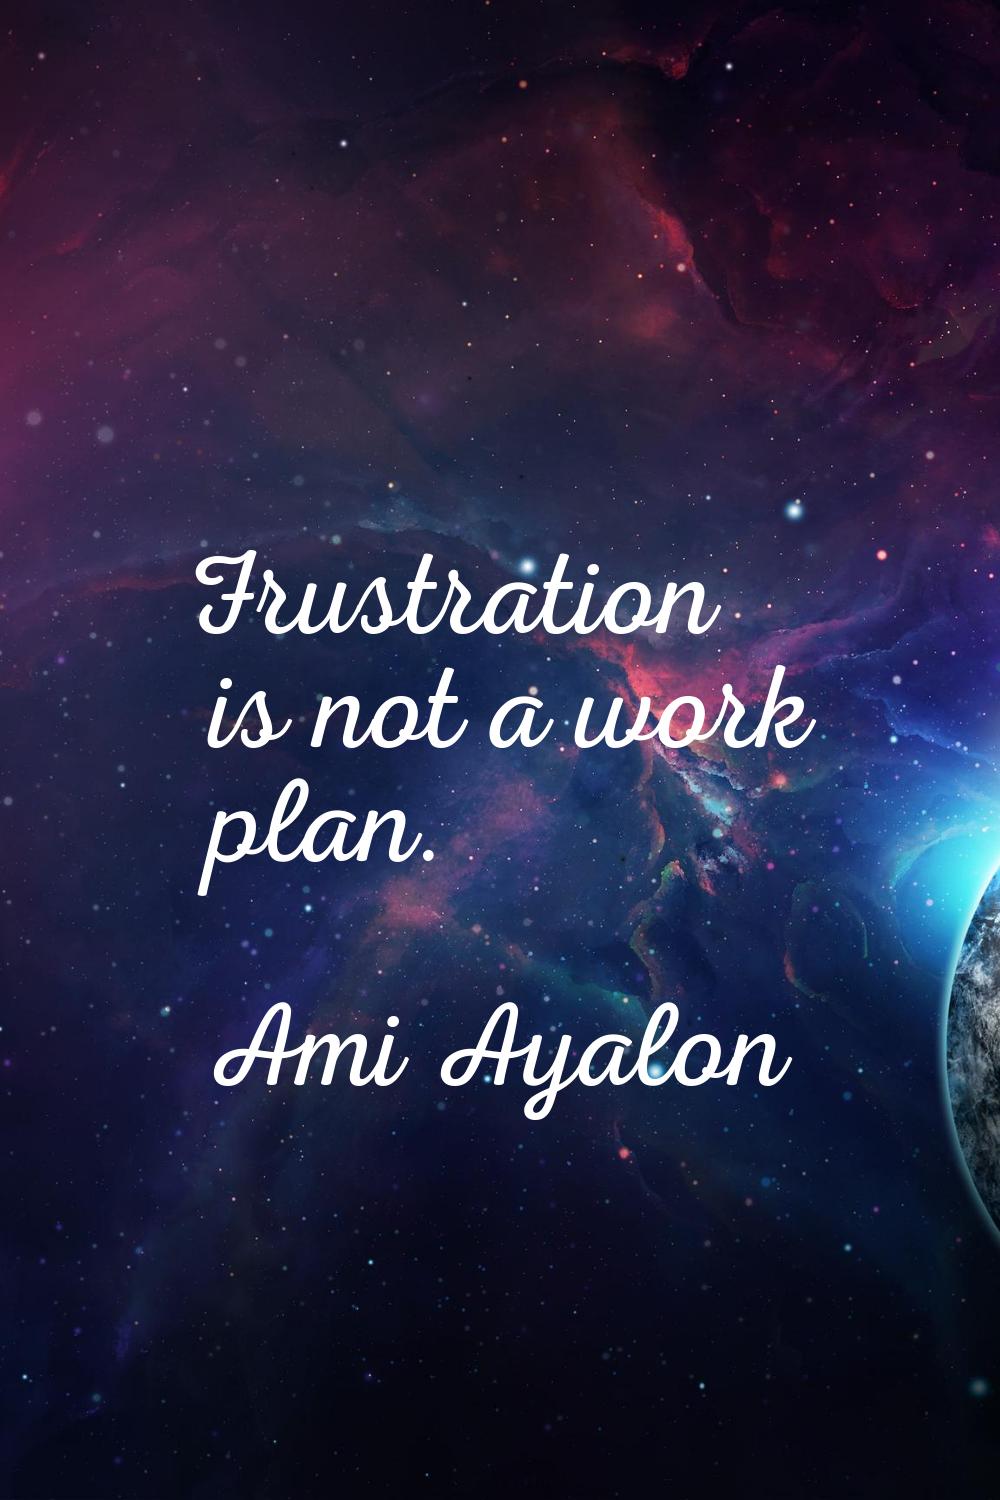 Frustration is not a work plan.